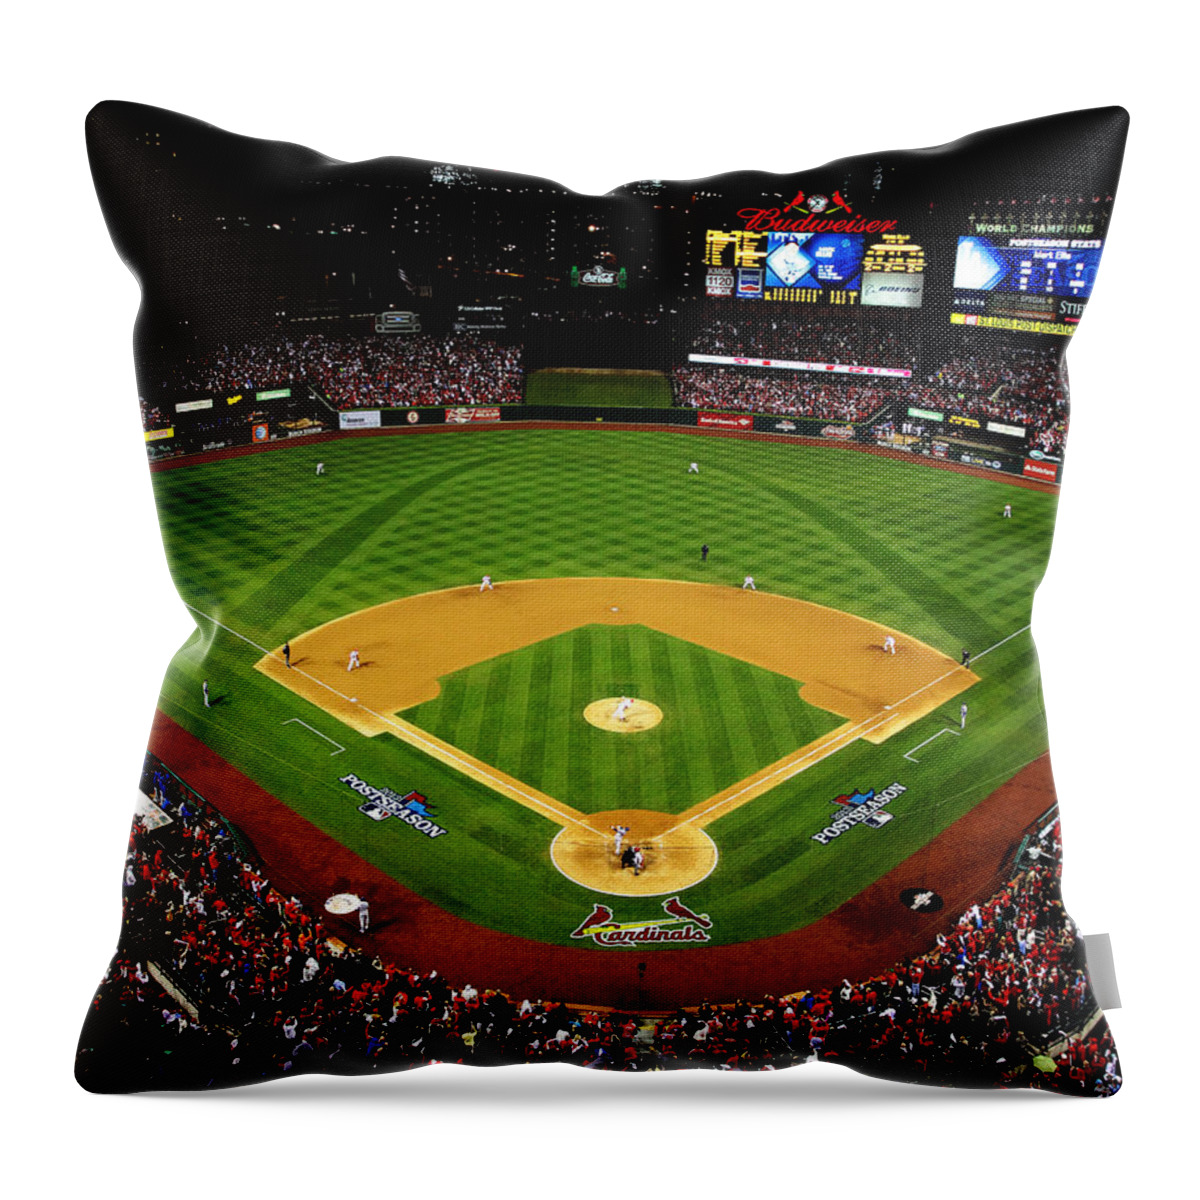 Nlcs Throw Pillow featuring the photograph Last Pitch by John Freidenberg